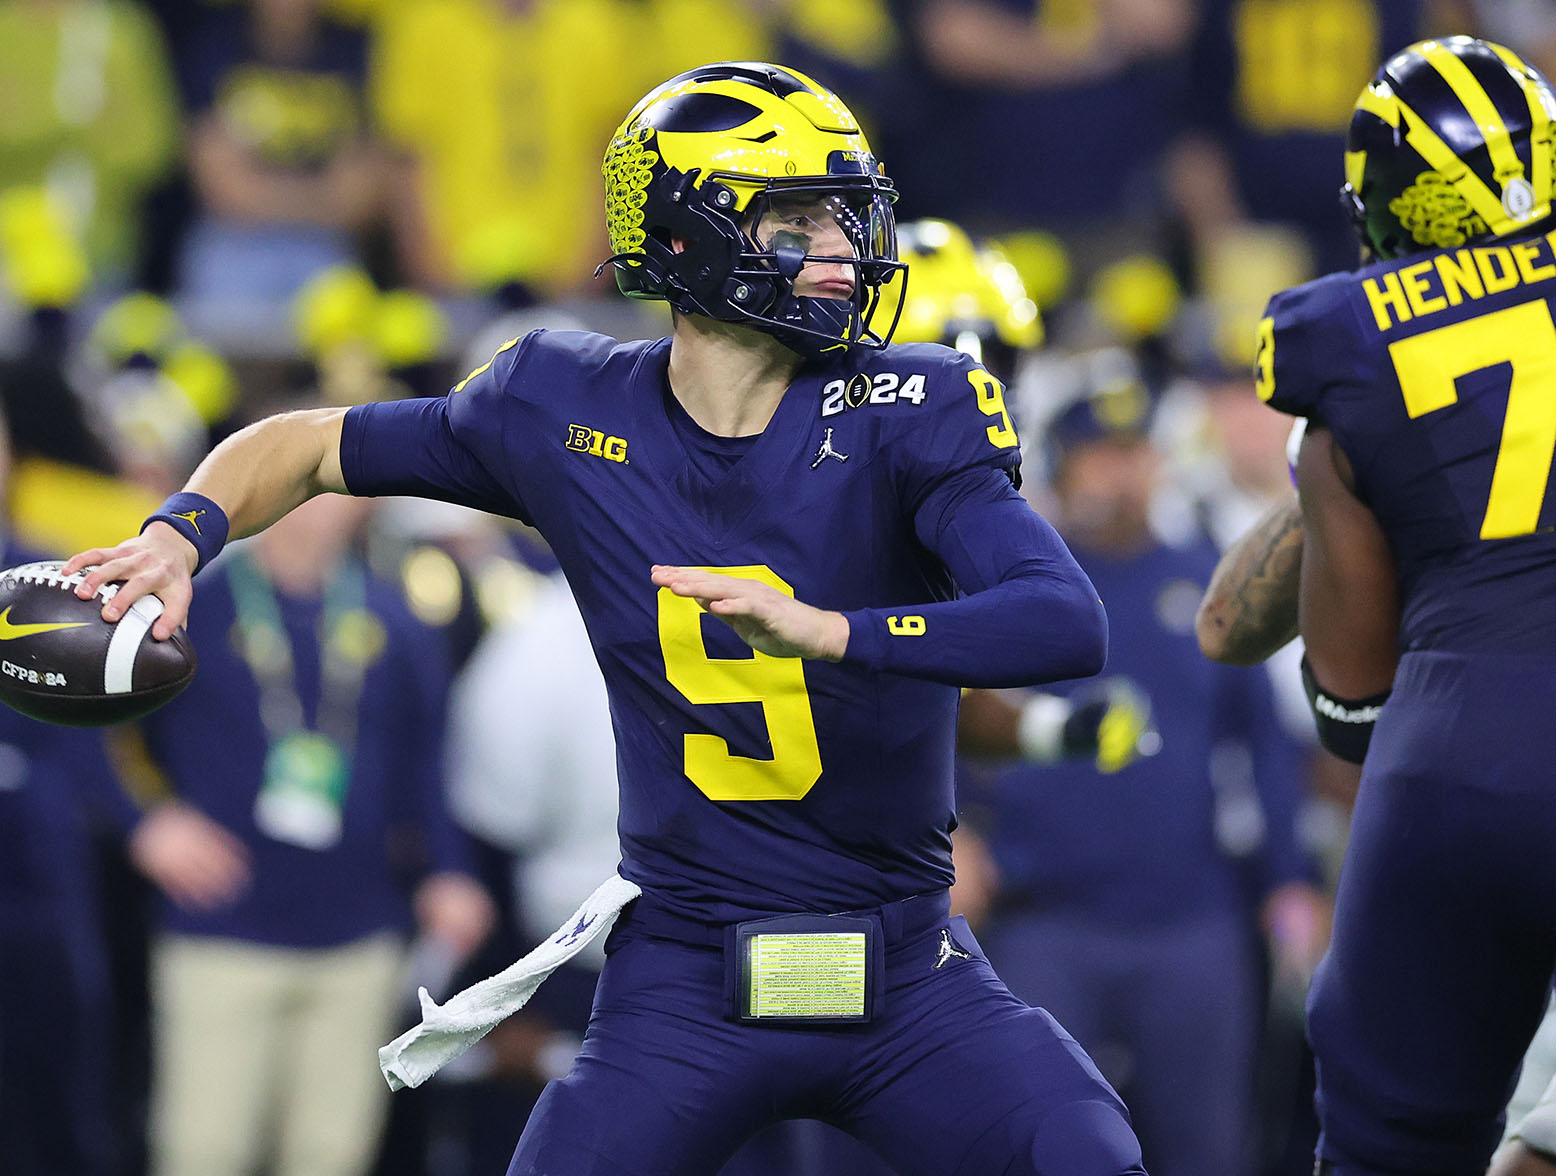 HOUSTON, TEXAS - JANUARY 08: J.J. McCarthy #9 of the Michigan Wolverines throws the ball in the second quarter against the Washington Huskies during the 2024 CFP National Championship game at NRG Stadium on January 08, 2024 in Houston, Texas. (Photo by Stacy Revere/Getty Images)